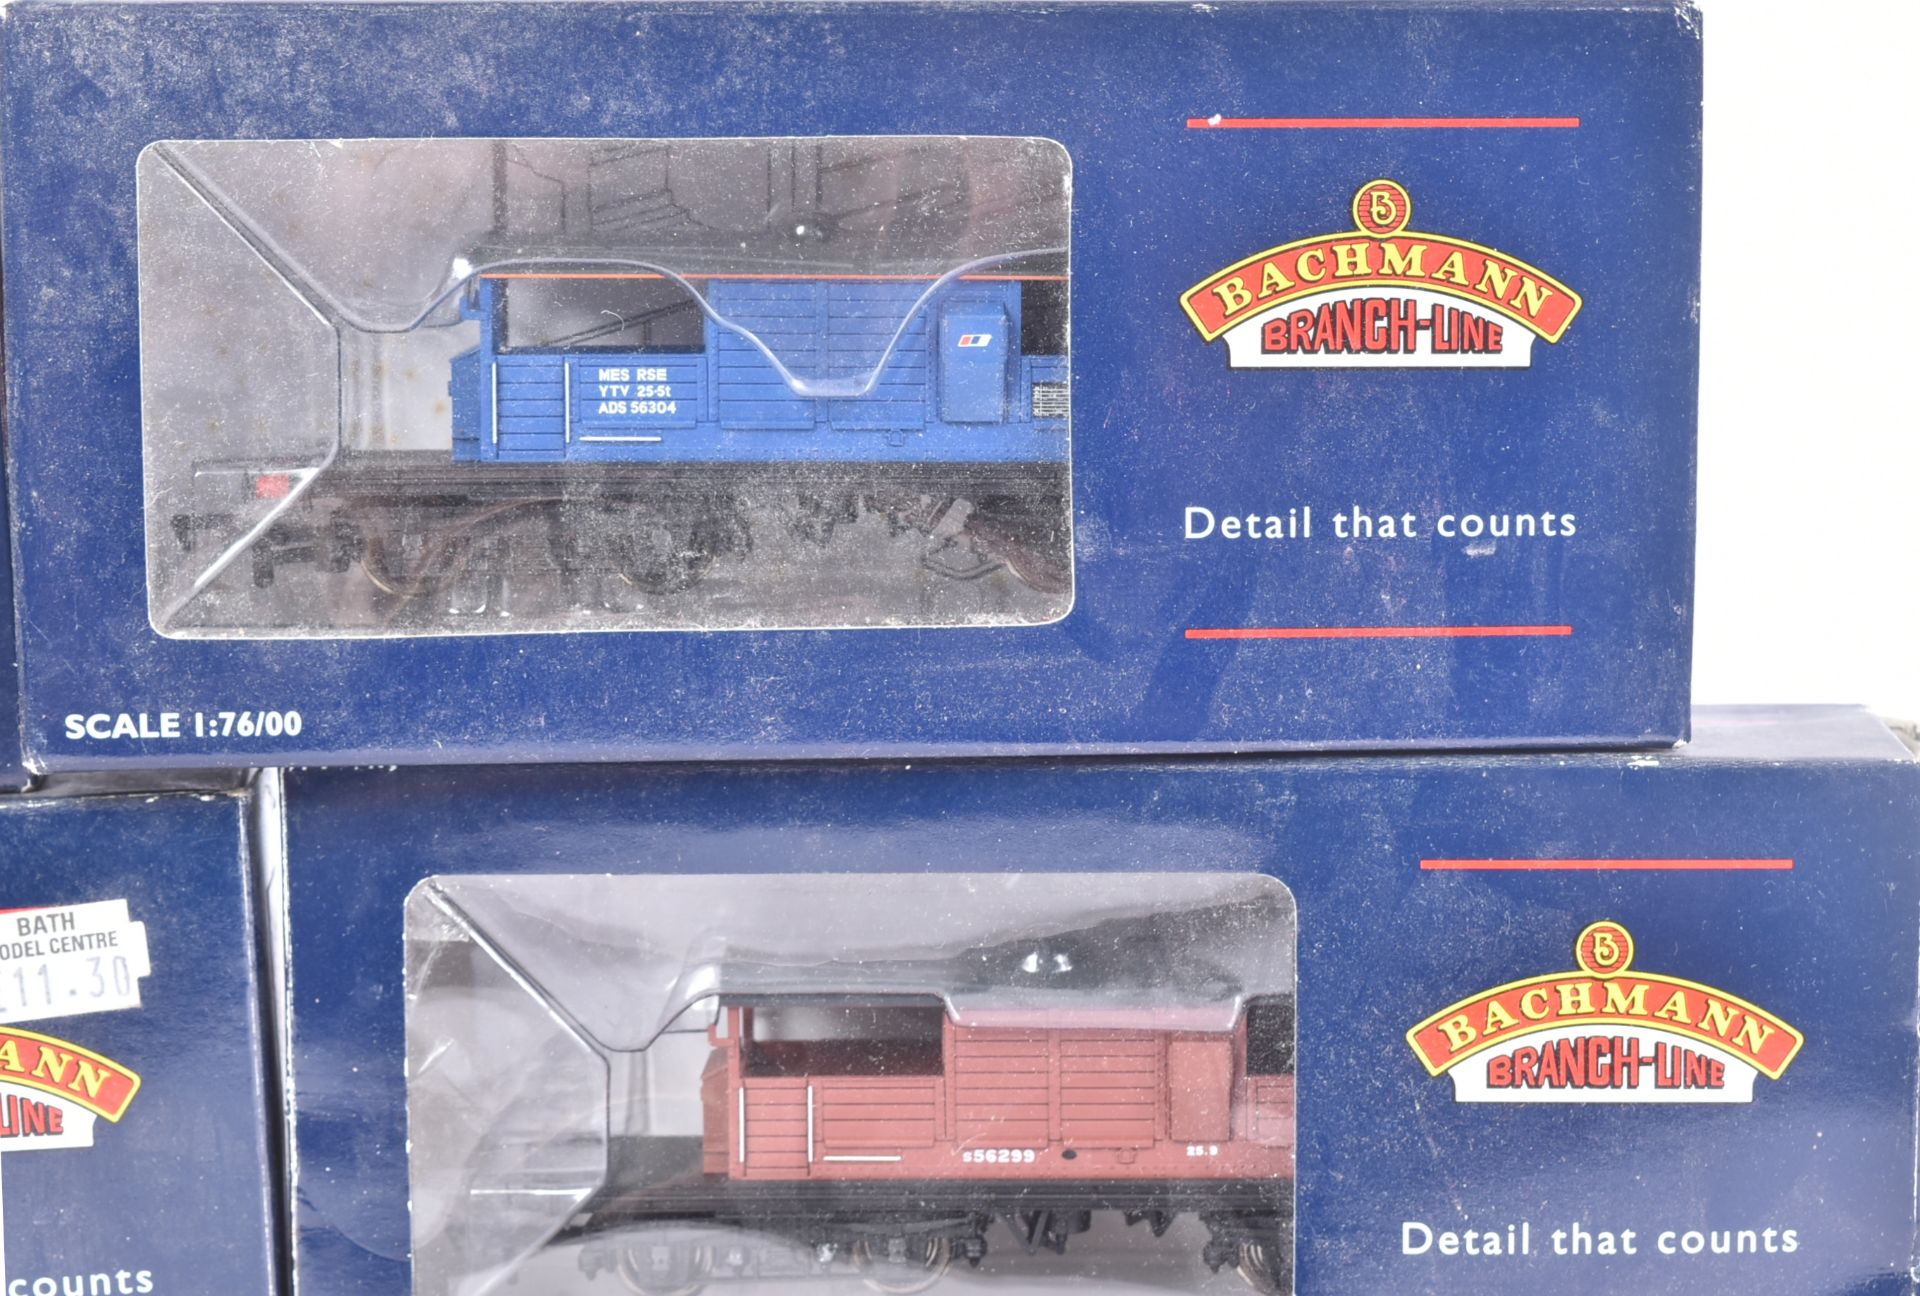 COLLECTION OF VINTAGE BACHMANN BRANCH-LINE OO GAUGE MODEL RAILWAY WAGONS AND BRAKE VANS - Image 2 of 5